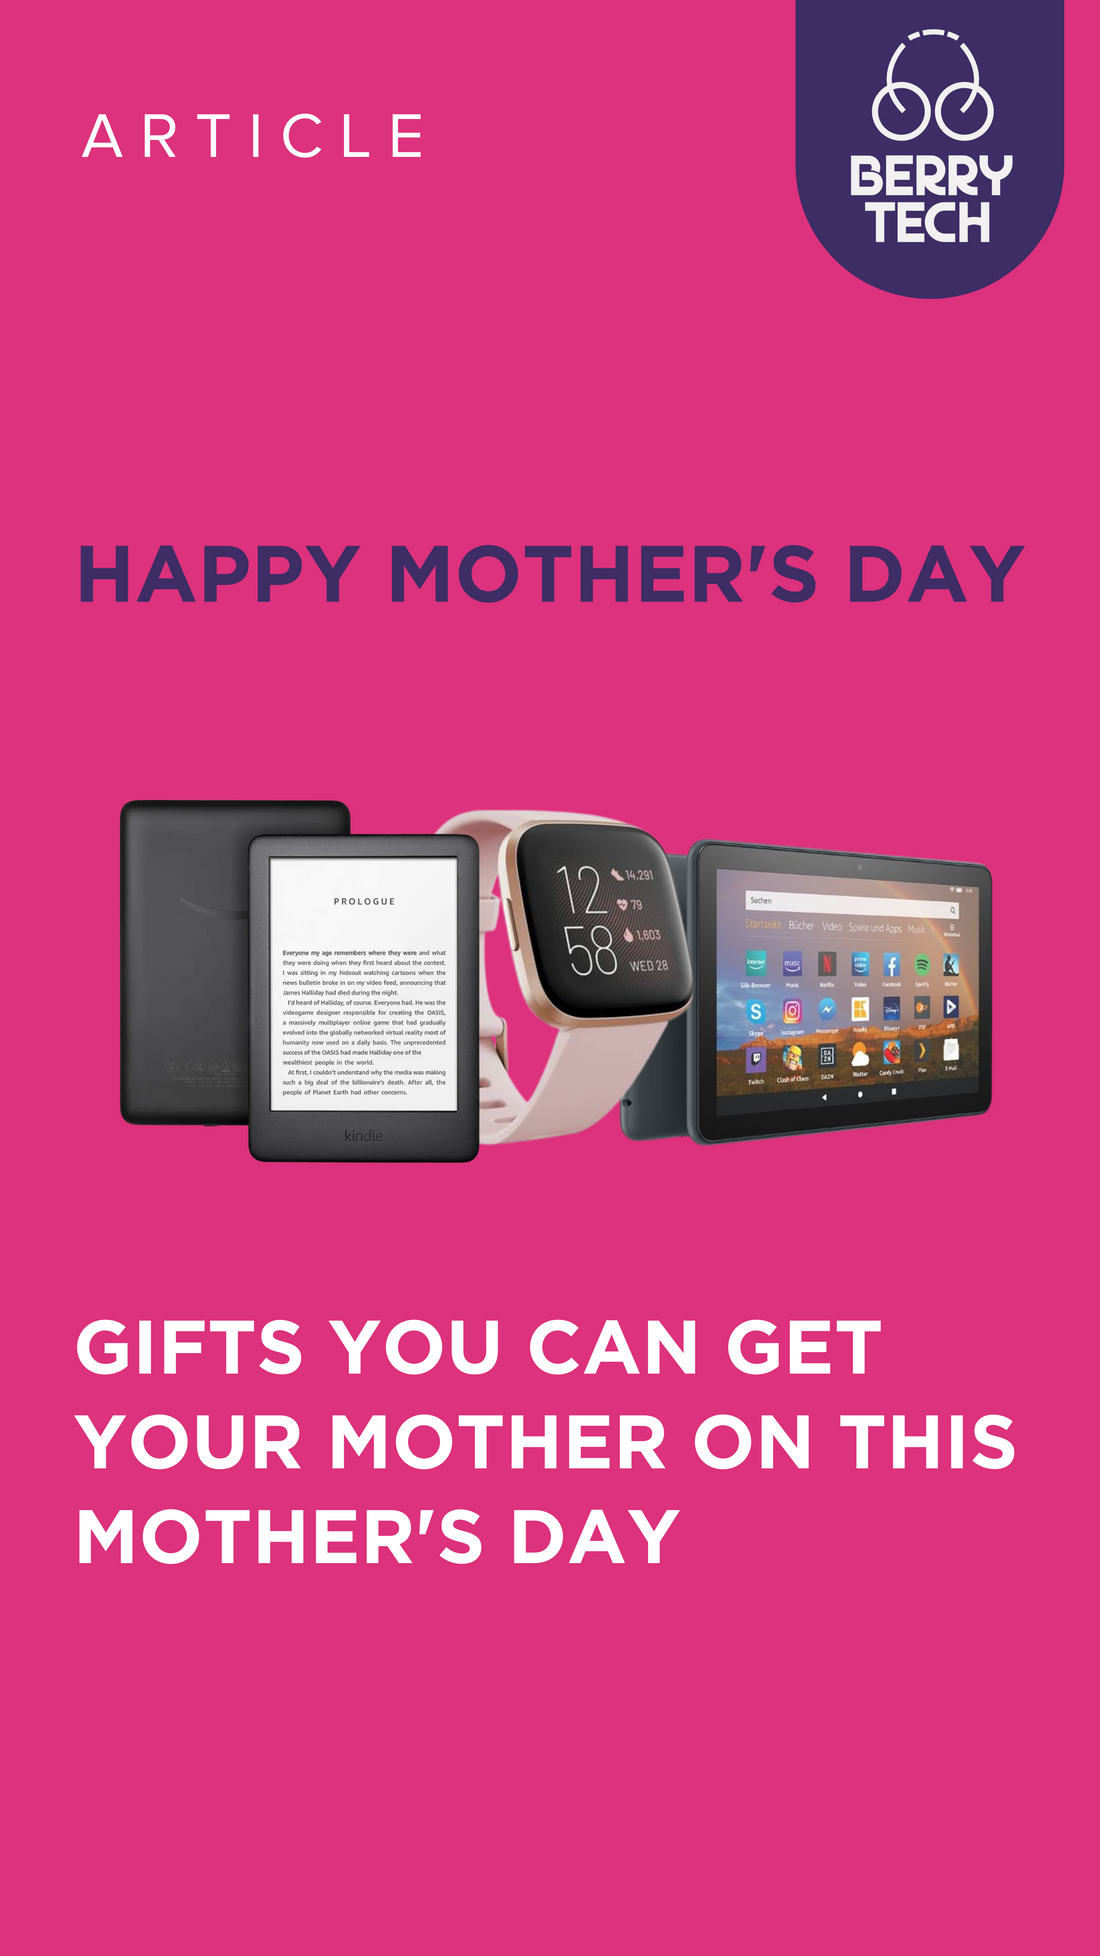 4 Gifts You Can Get Your Mother on This Mother’s Day